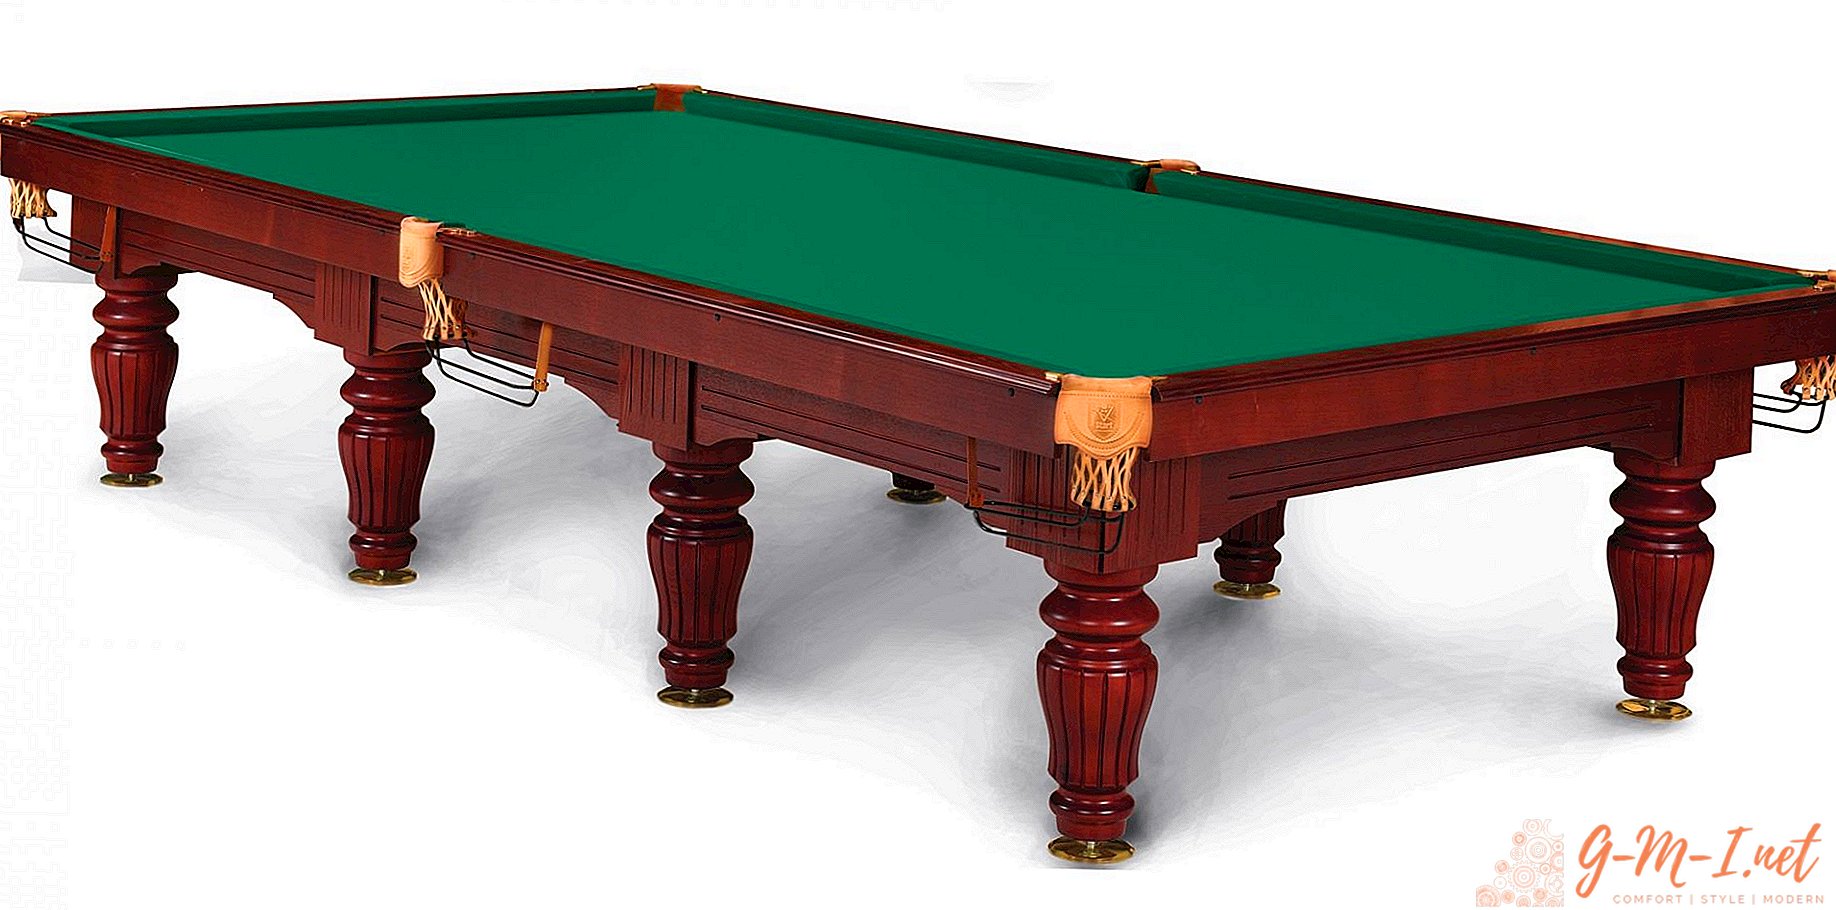 Sizes of billiard tables